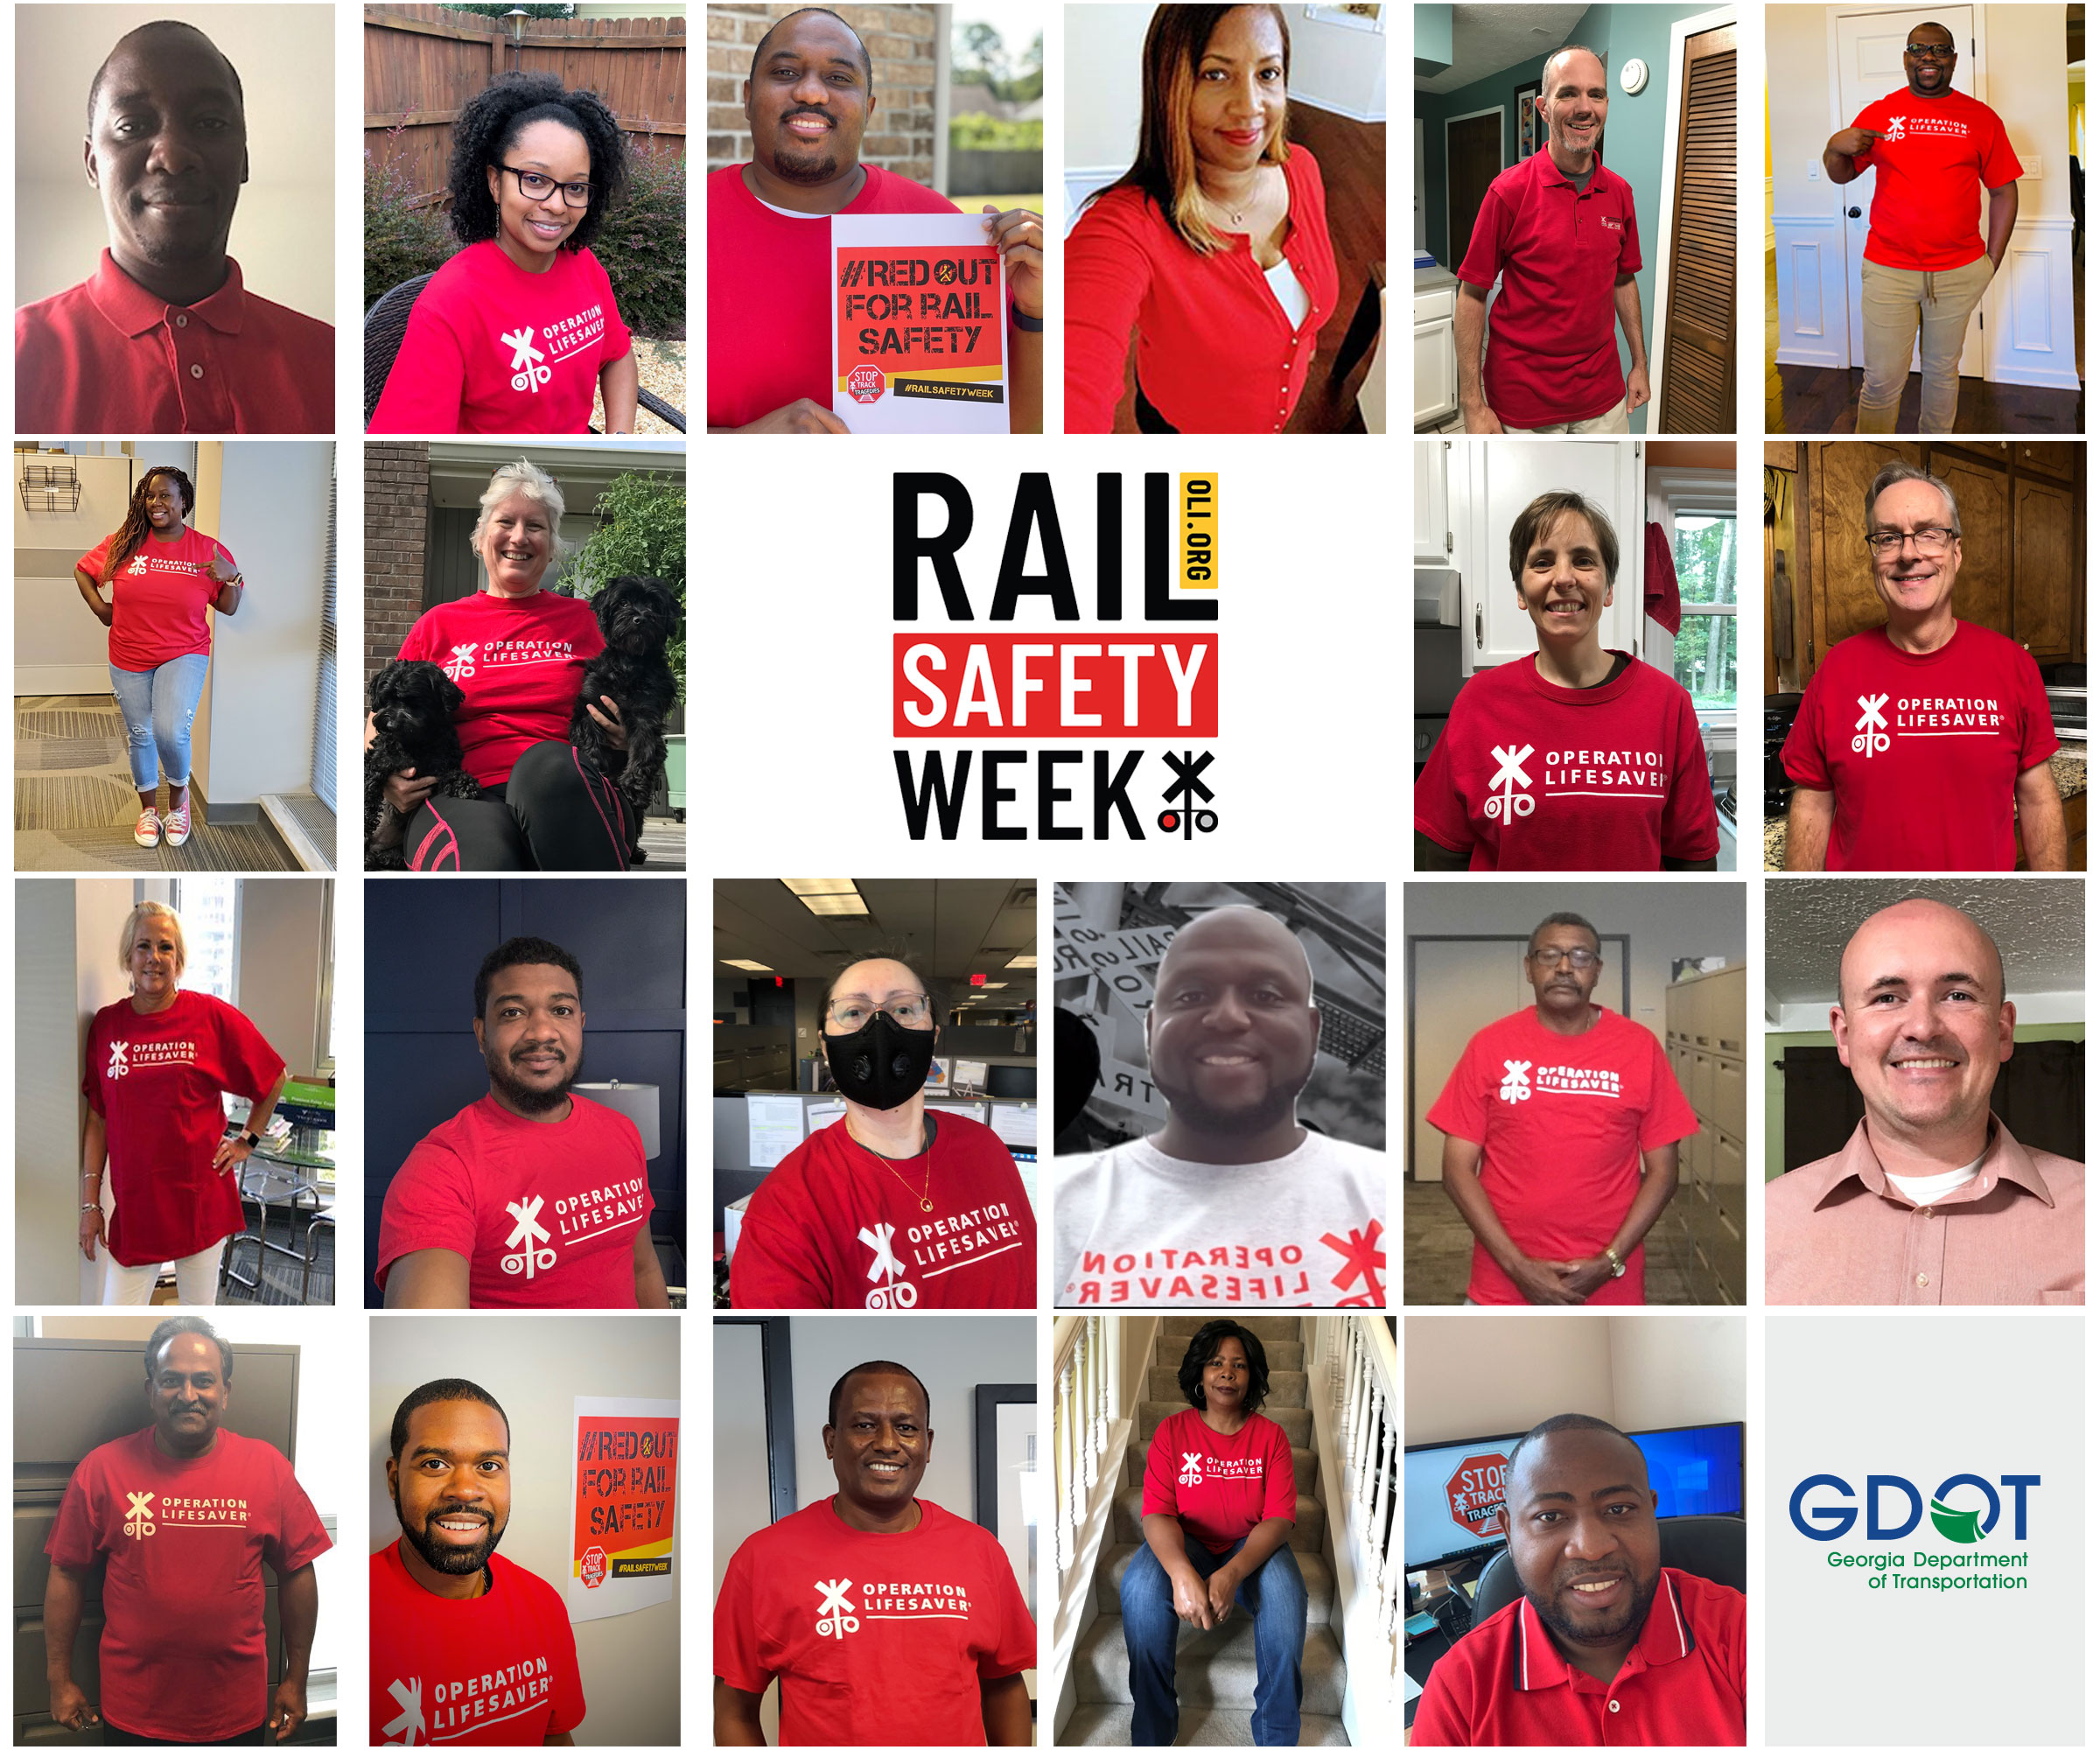 Red Out for Rail Safety